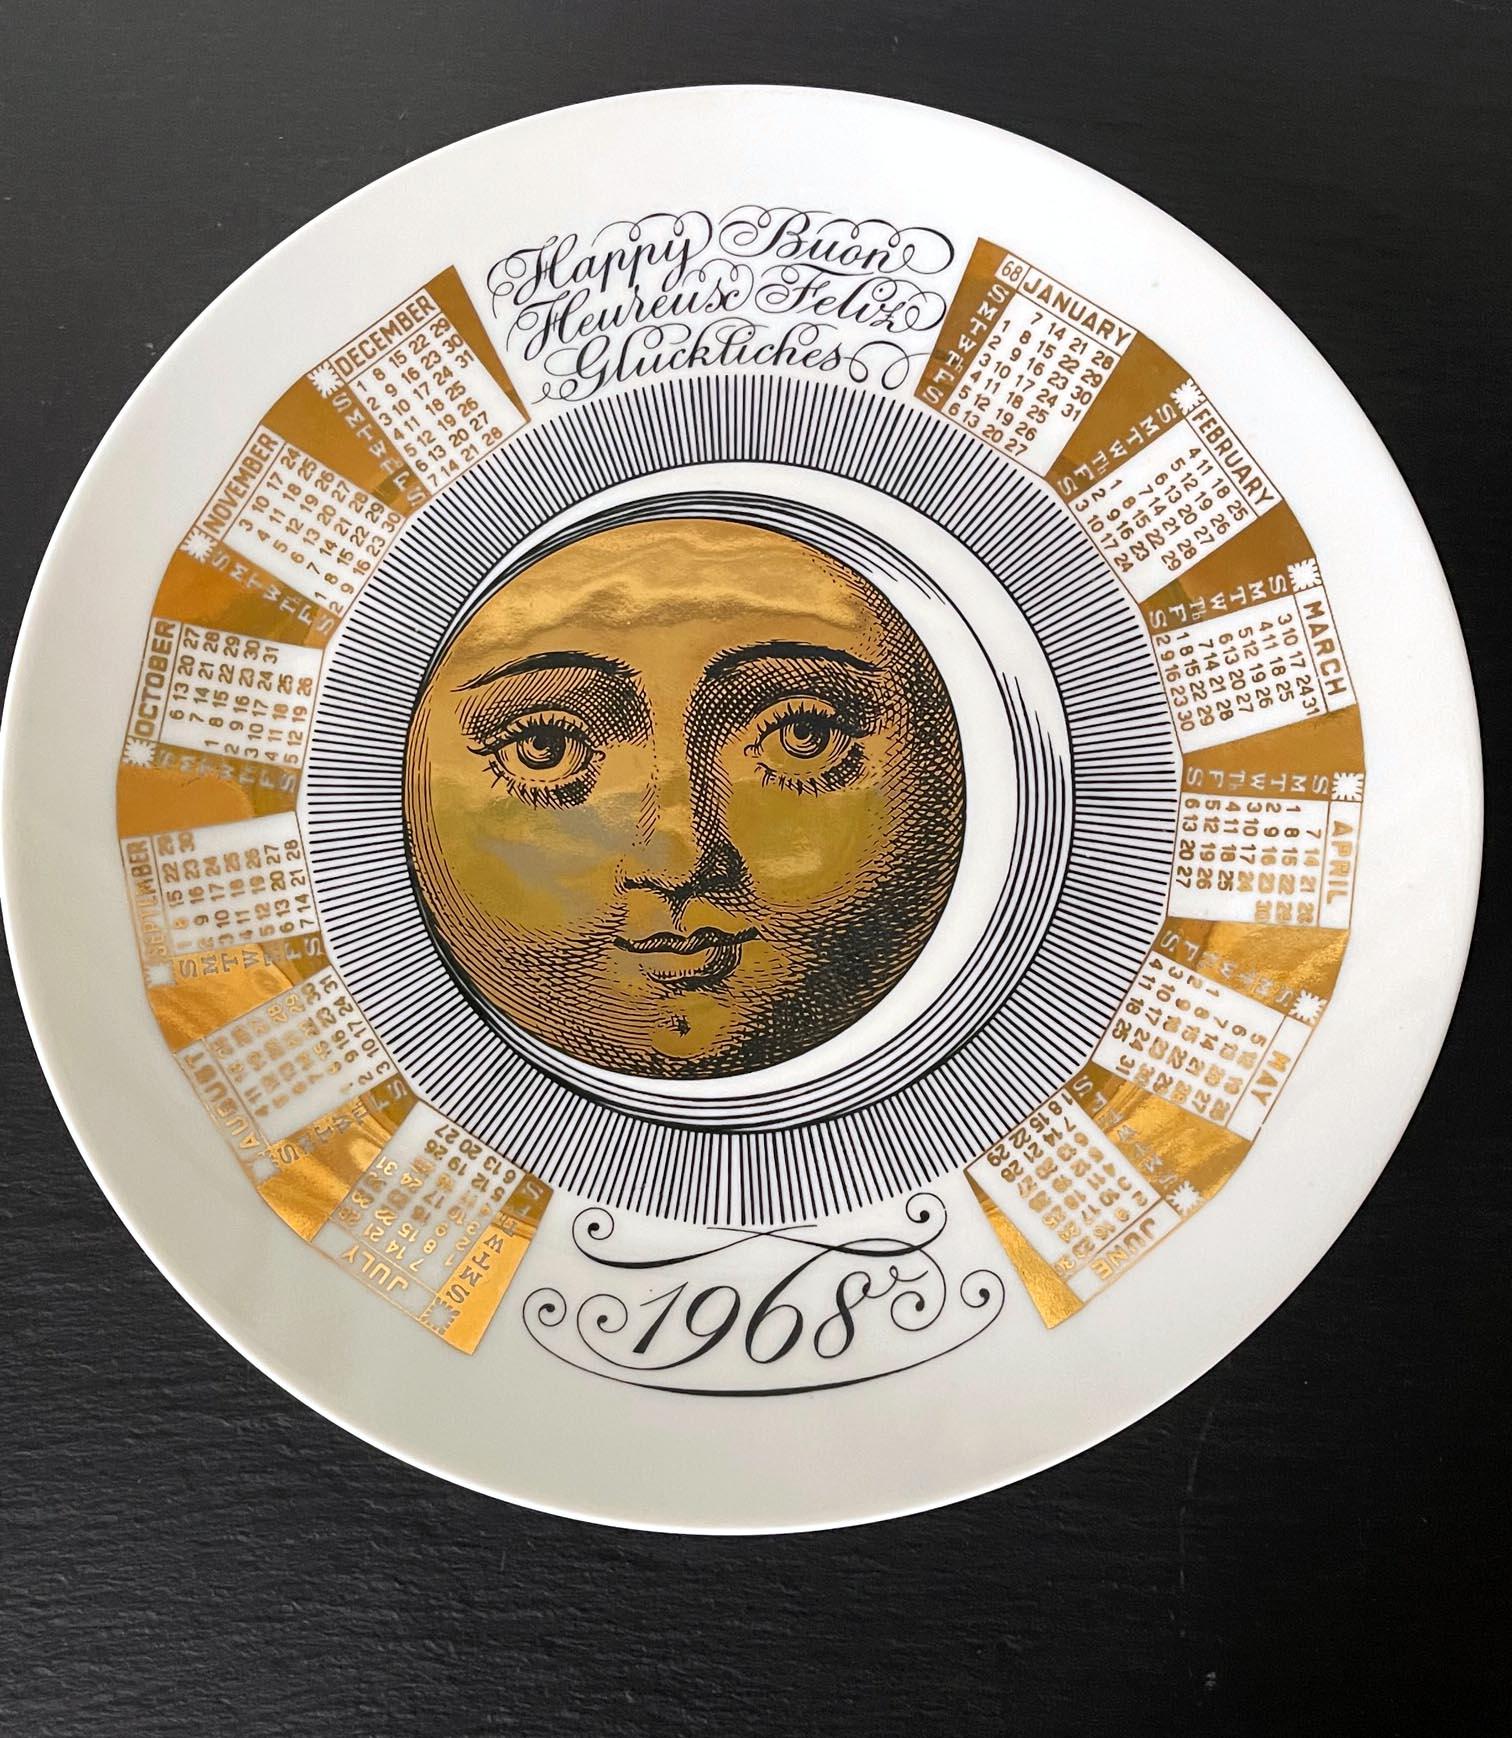 A vintage Italian decorative porcelain plate designed by Piero Fornasetti and made by Fornasetti. The commemorative plate is for the year of 1968 and features the iconic sun and moon motif by the artist surrounded by the monthly calendar. The back